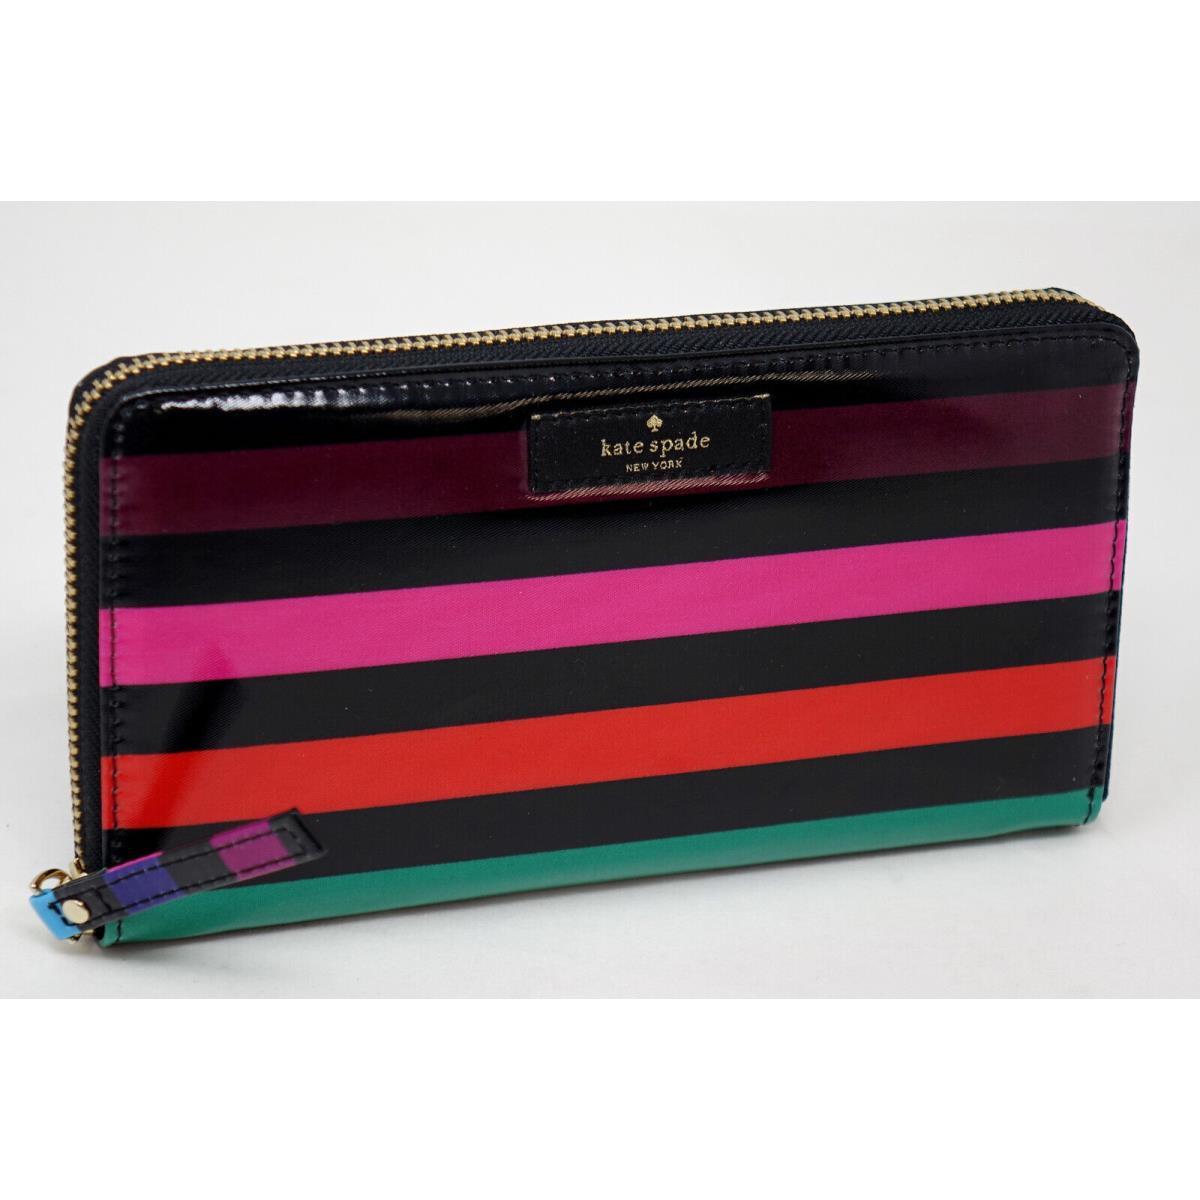 New Kate Spade Women`s Black Red Pink Multicolor Striped Large Zip Around Wallet